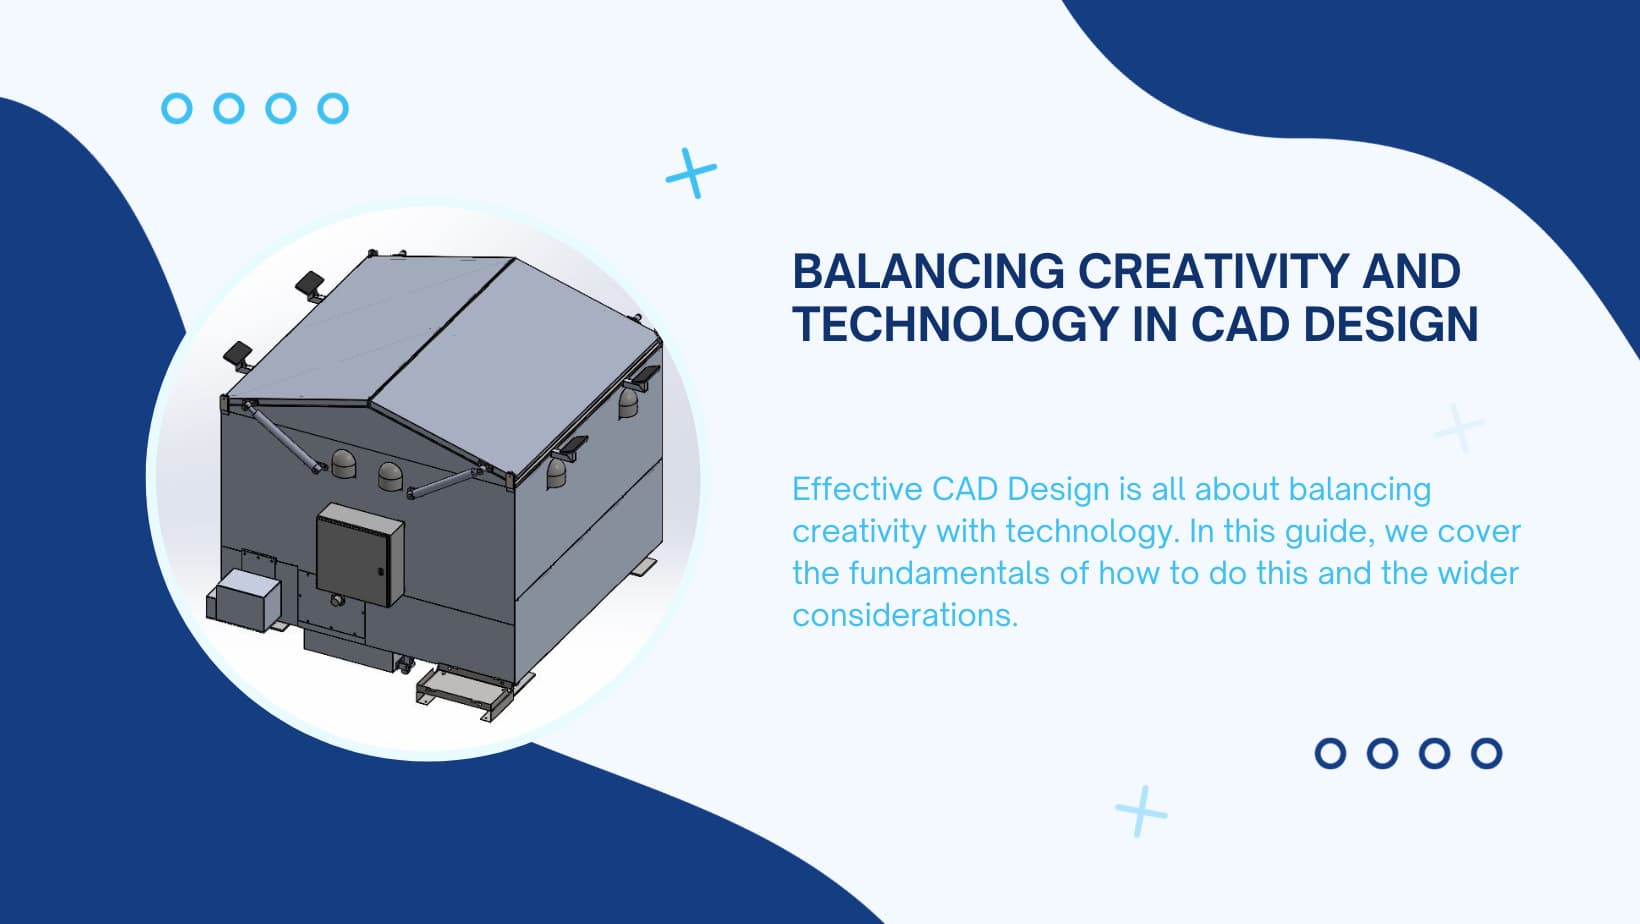 Balancing creativity and technology in cad design.